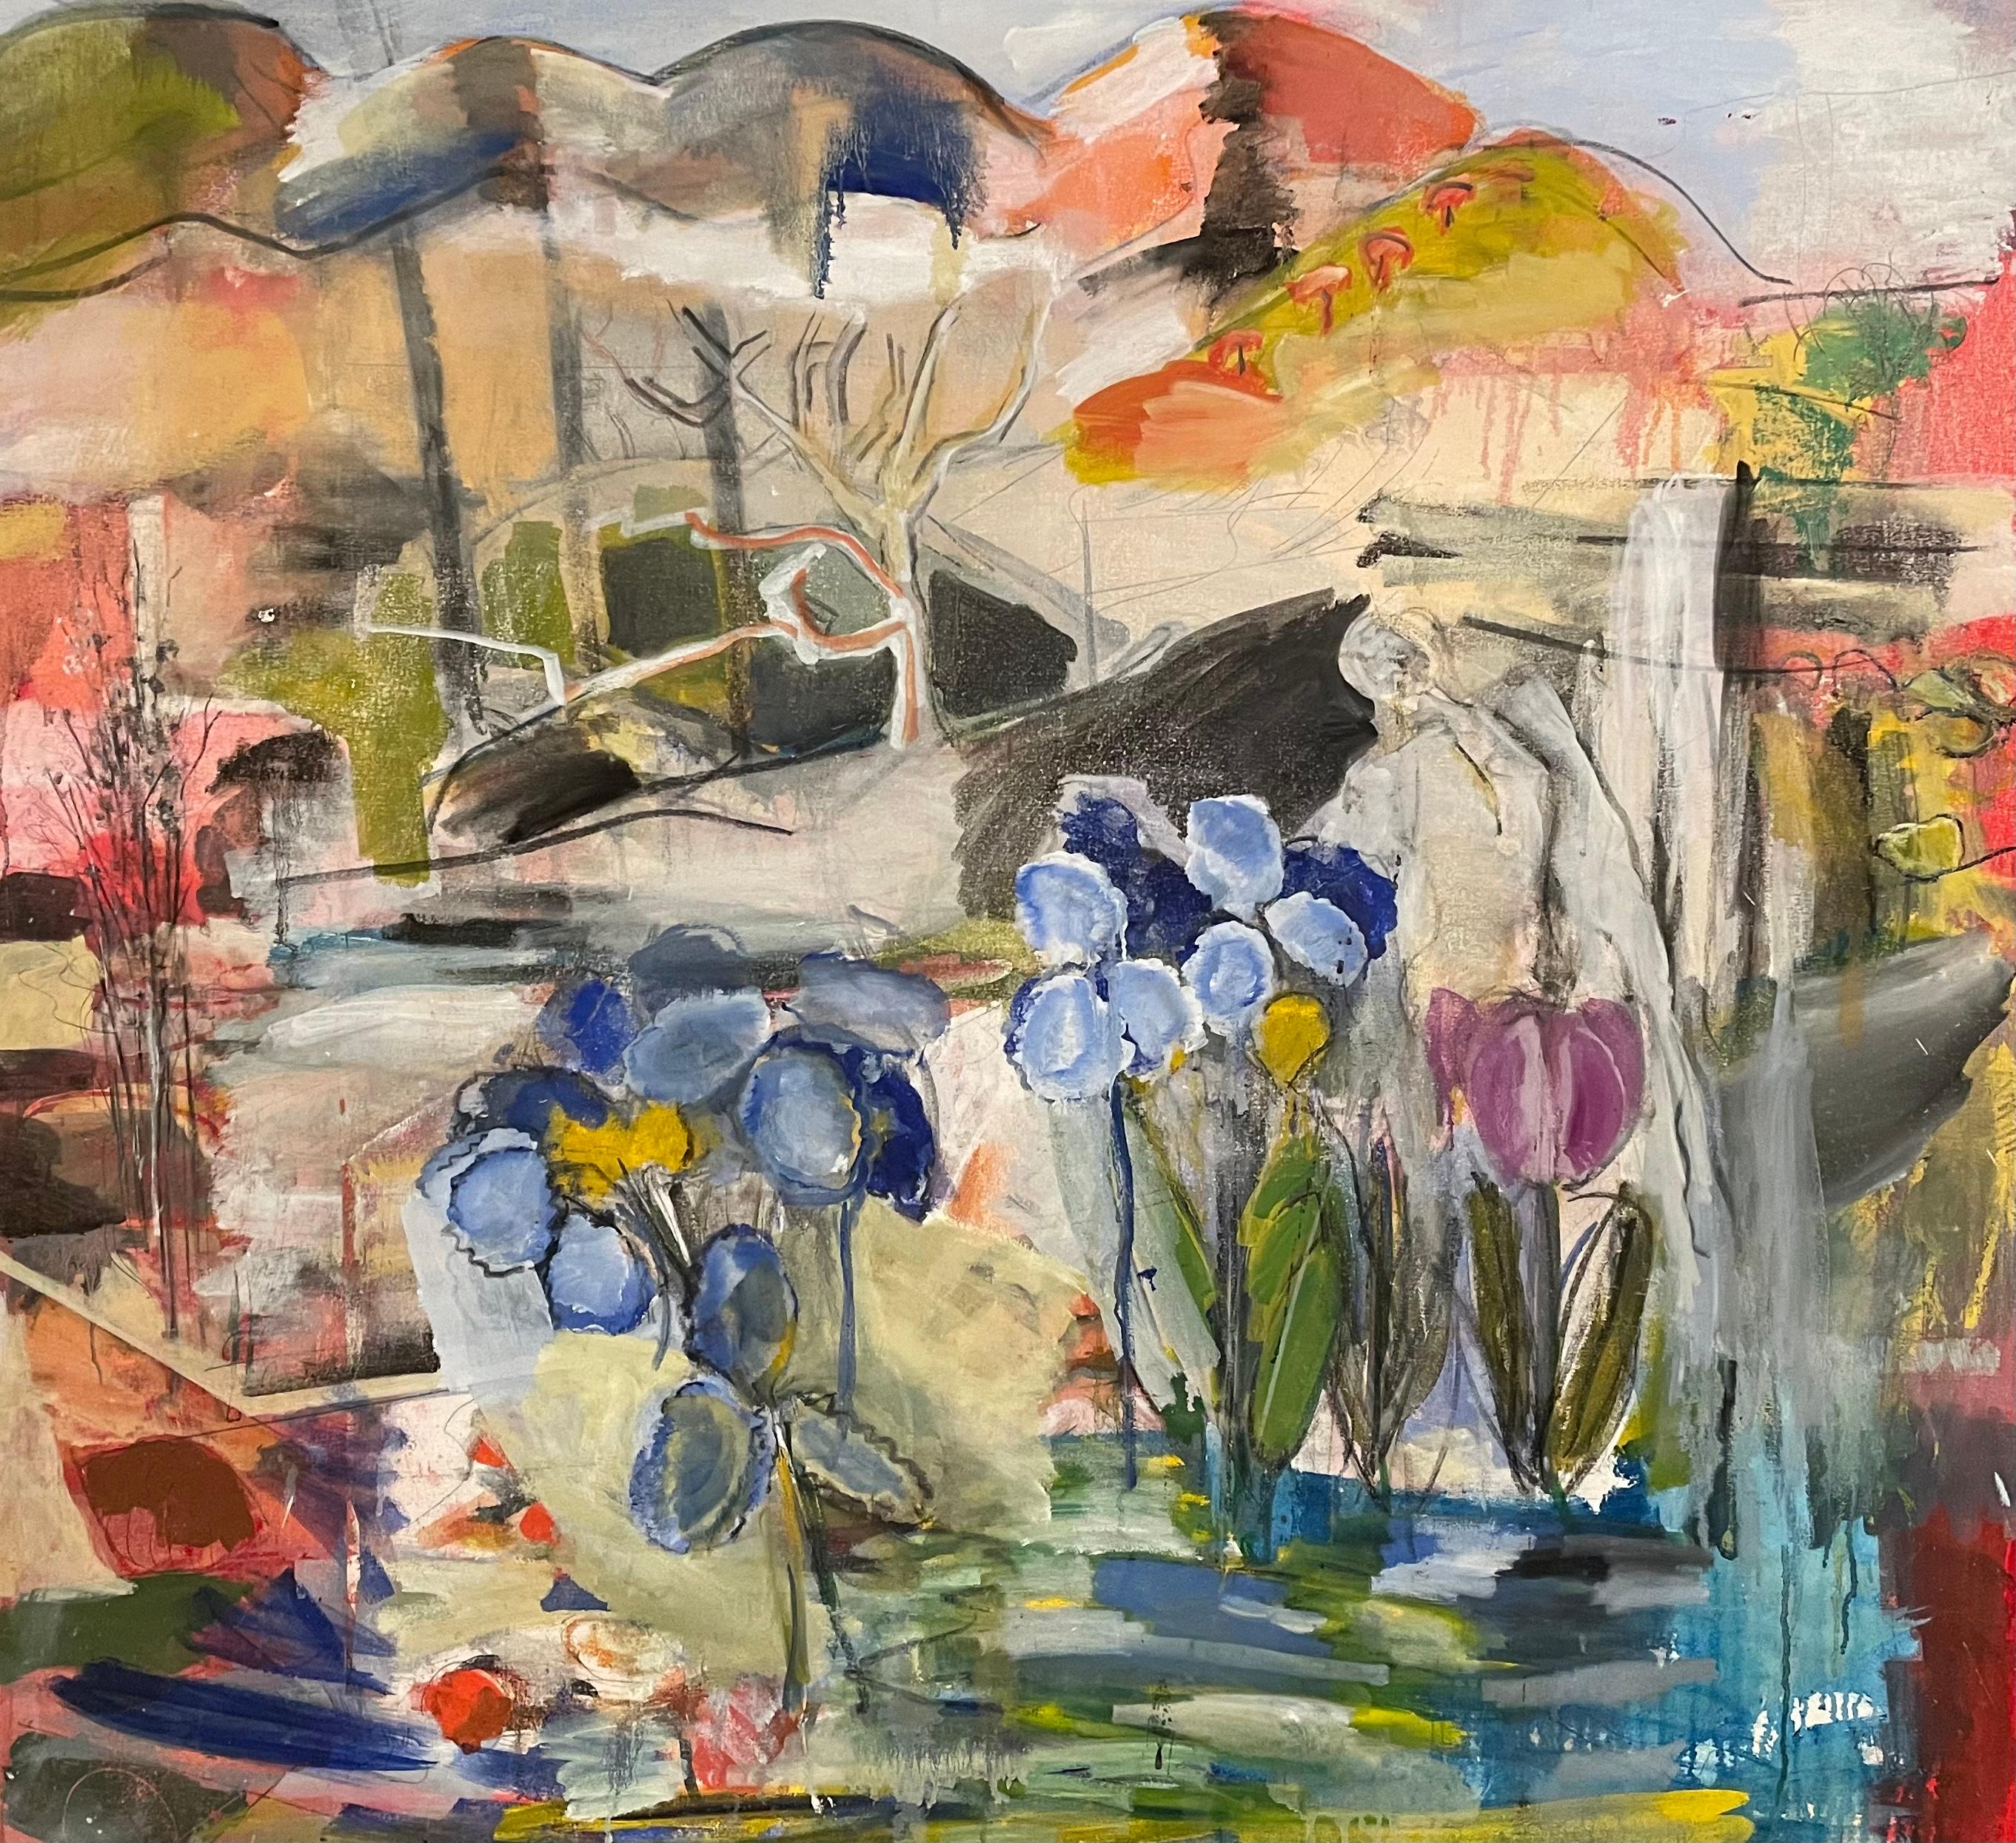 Steven H. Rehfeld Abstract Painting - "May Flowers" Mixed Media Colorful Contemporary Abstract Landscape